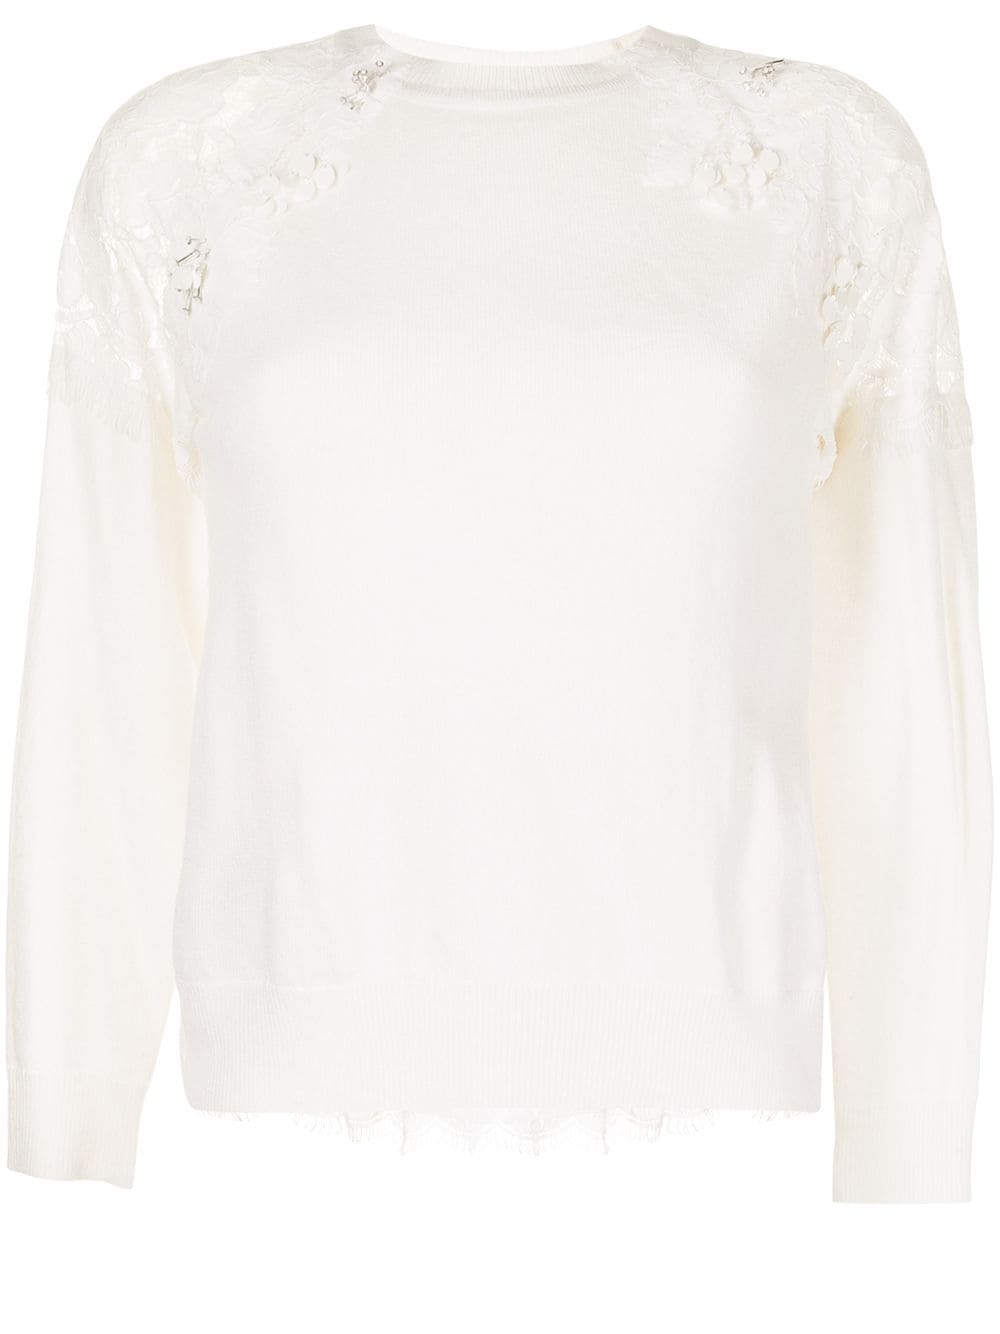 Onefifteen floral lace-panel knit top - White von Onefifteen